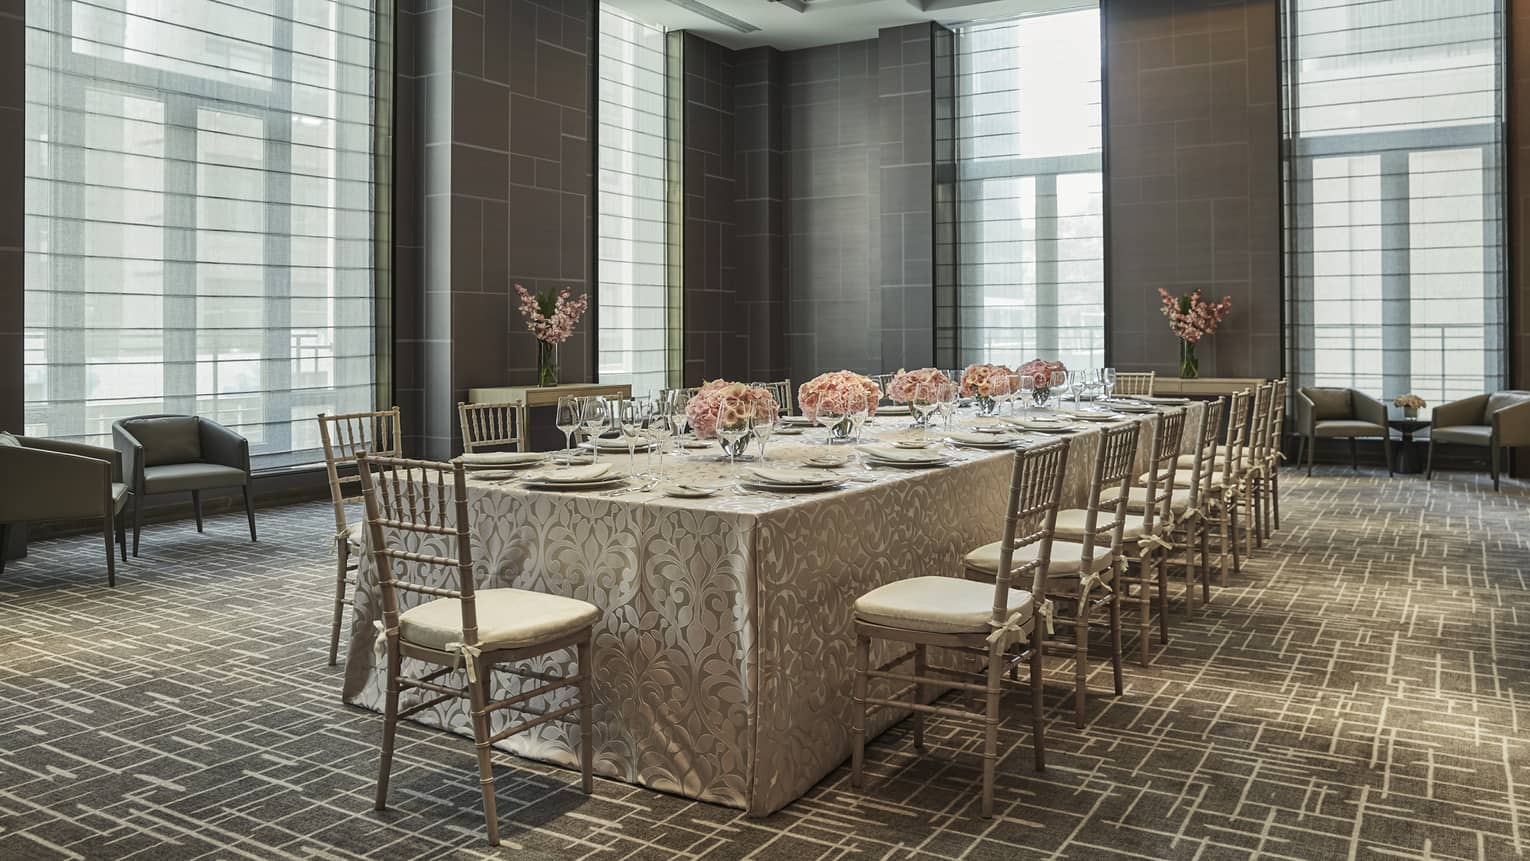 ,A long table with table cloth and flower centerpieces in a room with large windows.